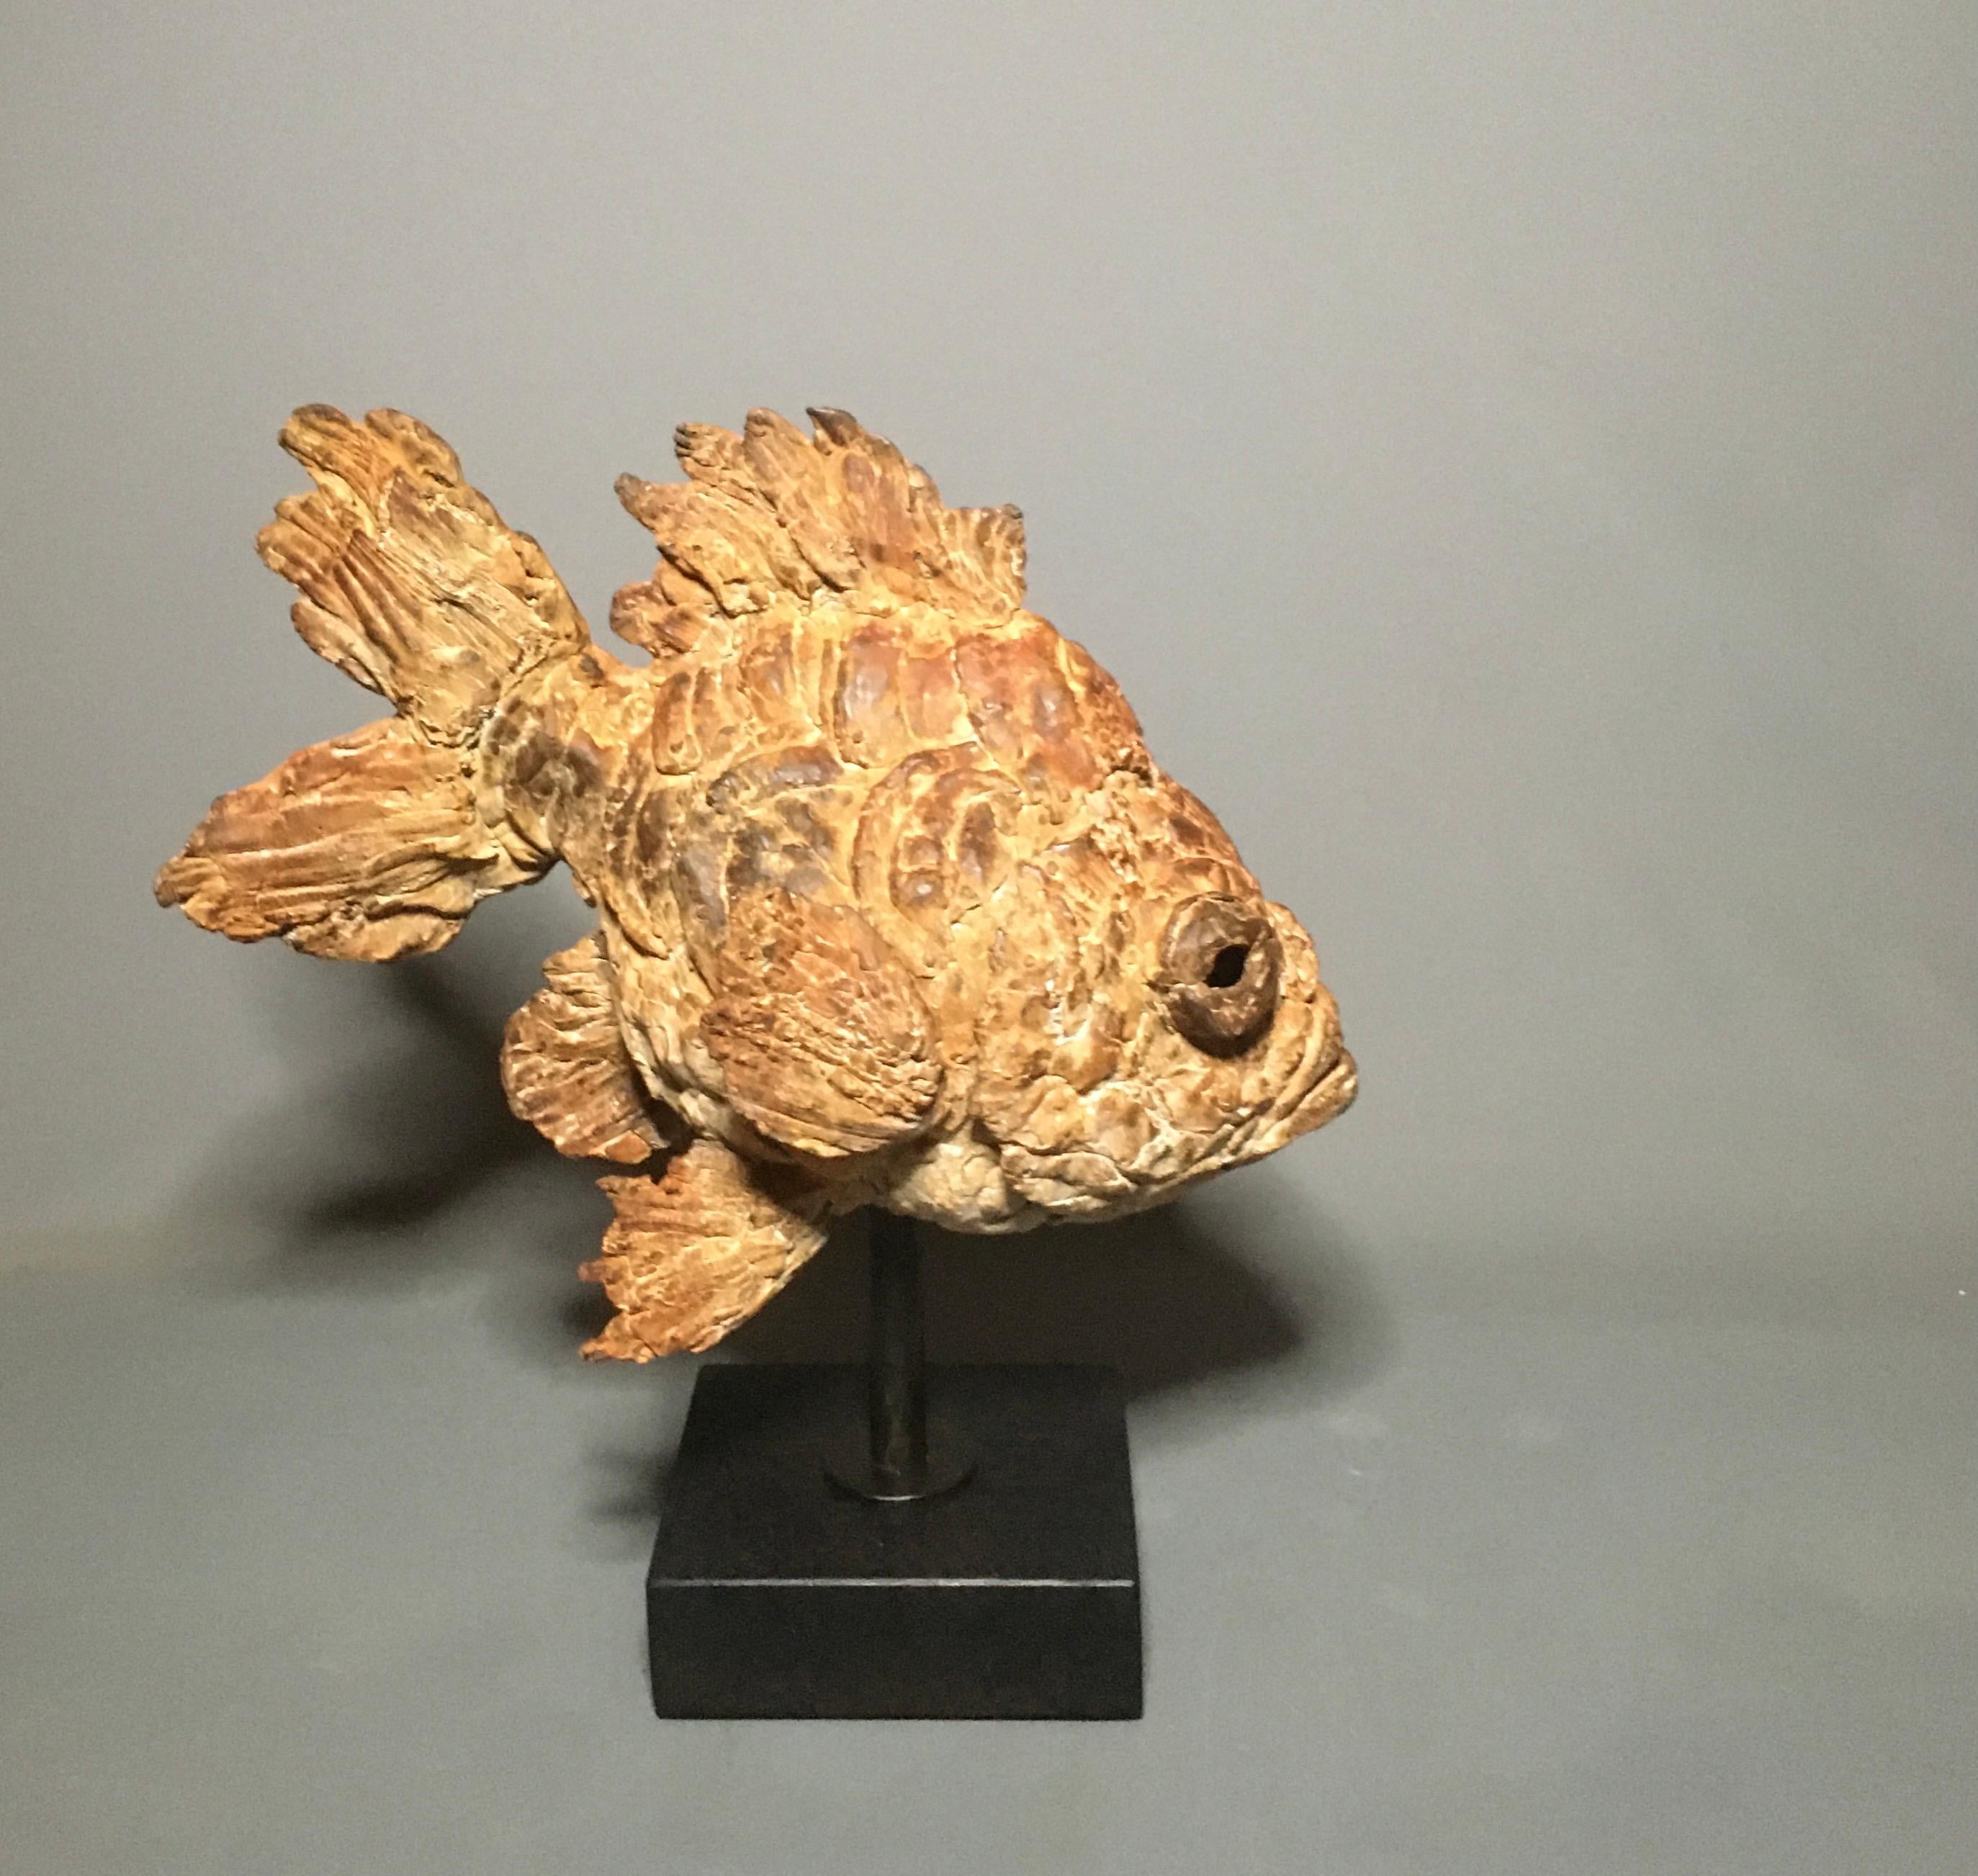 Arlequino Bronze Sculpture Fish Animal Water Brown Contemporary  In Stock 

Pieter Vanden Daele was born in Belgium in 1971. He grew up between lakes and the river Scheldt. The river De Scheldt and the variety of lakes are an ideal environment for